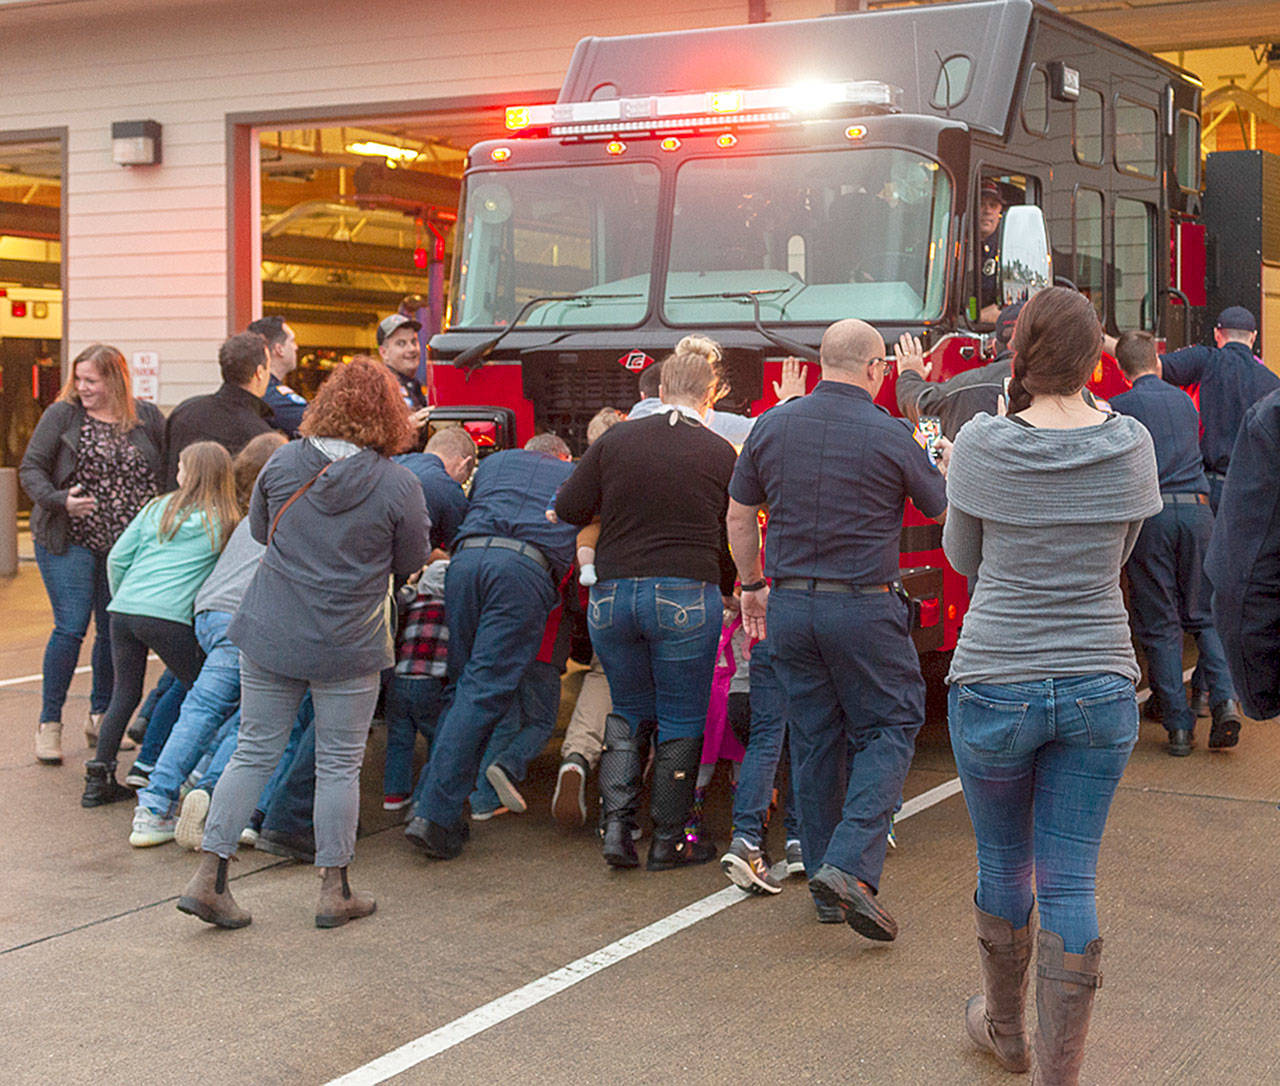 Members and friends of the Ocean Shores Fire Department dedicate the new, custom-built fire engine in a traditional push-in ceremony on Saturday, Jan. 18. (Photo courtesy of OSFD/Mike McGregor)